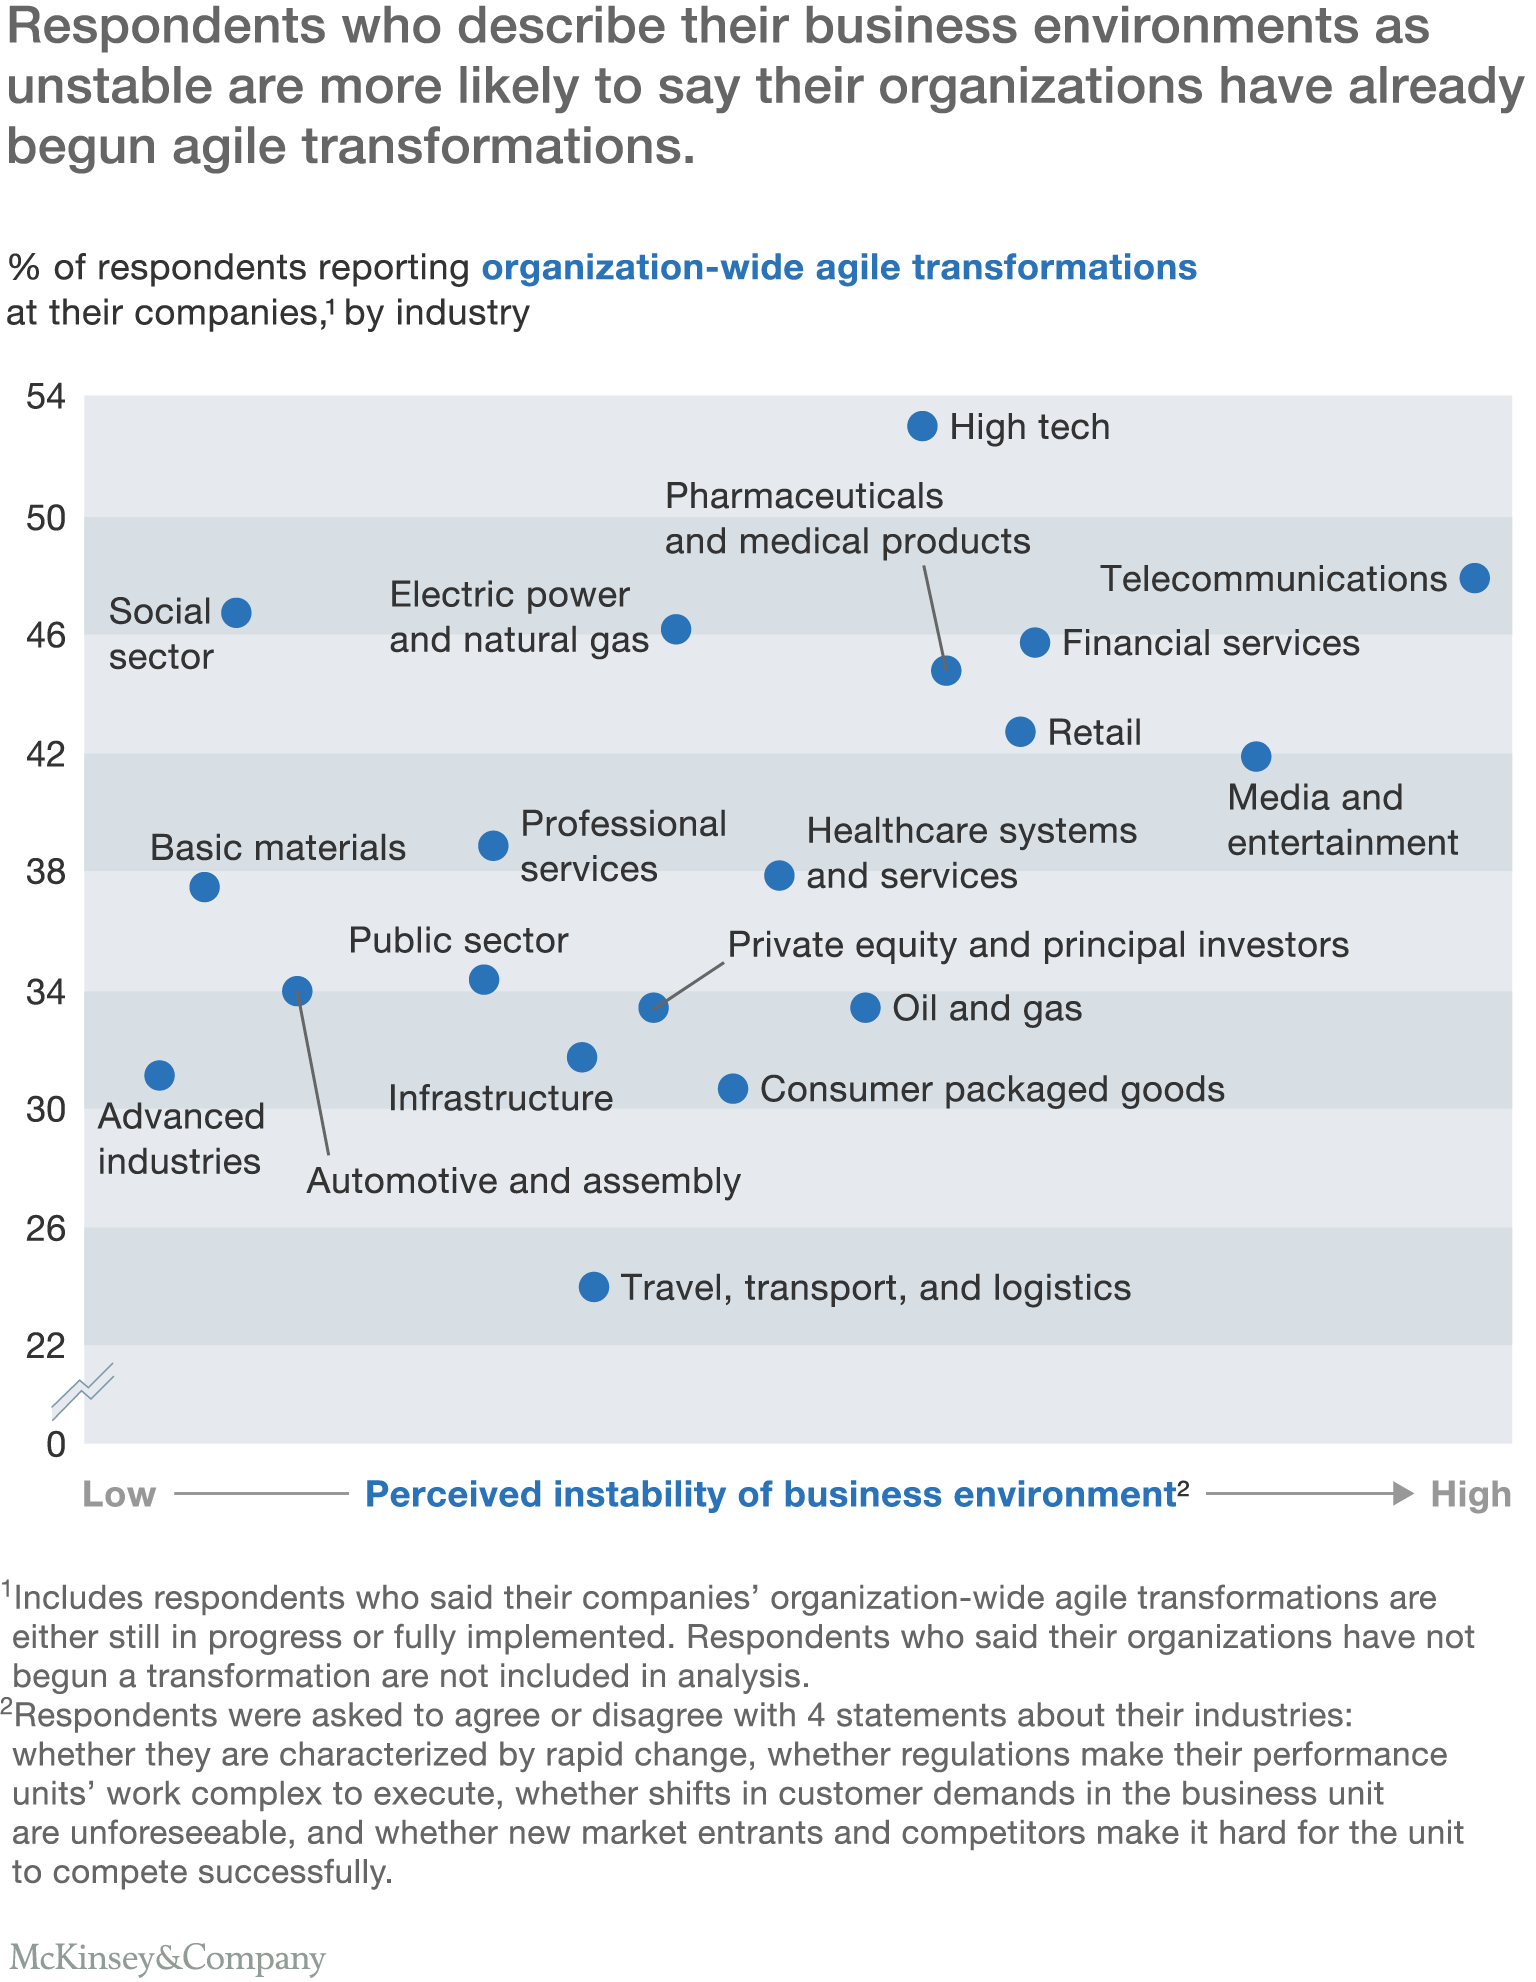 Respondents who describe their business environments as unstable are more likely to say their organizations have already begun agile transformations.